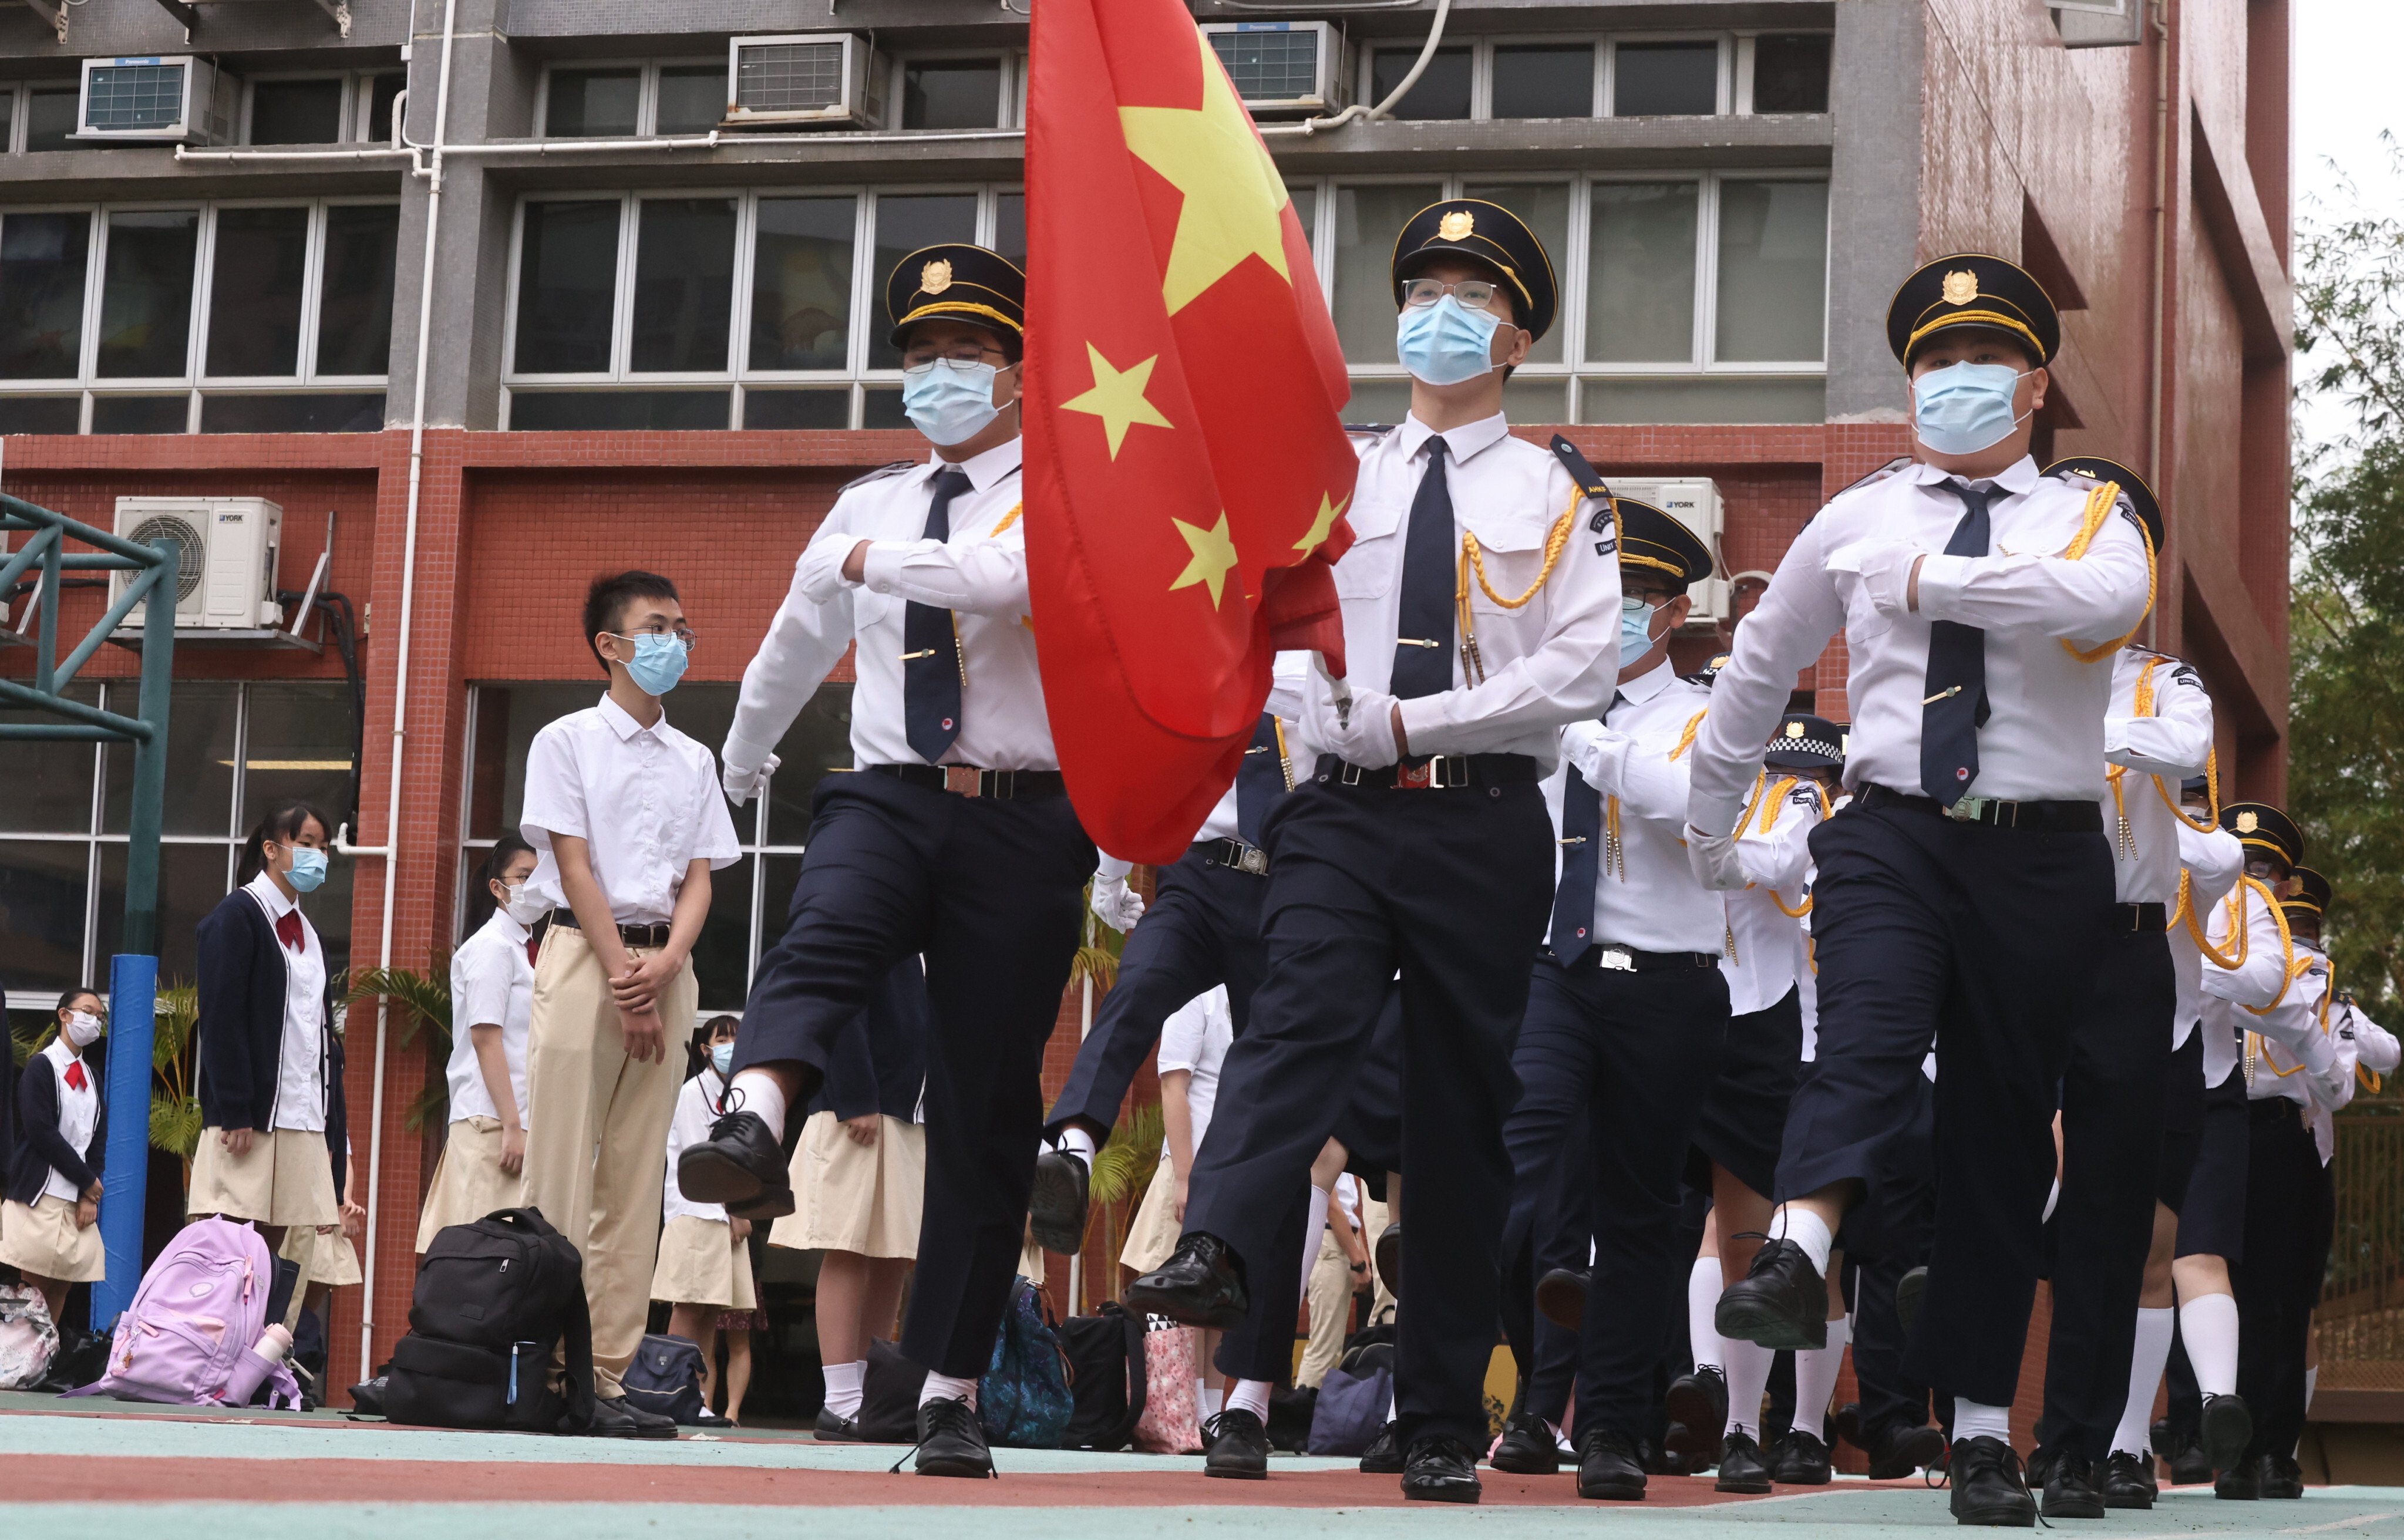 Many schools are unsure about how to promote national security education, which is mandatory under the national security law. Photo: SCMP/ K. Y. Cheng